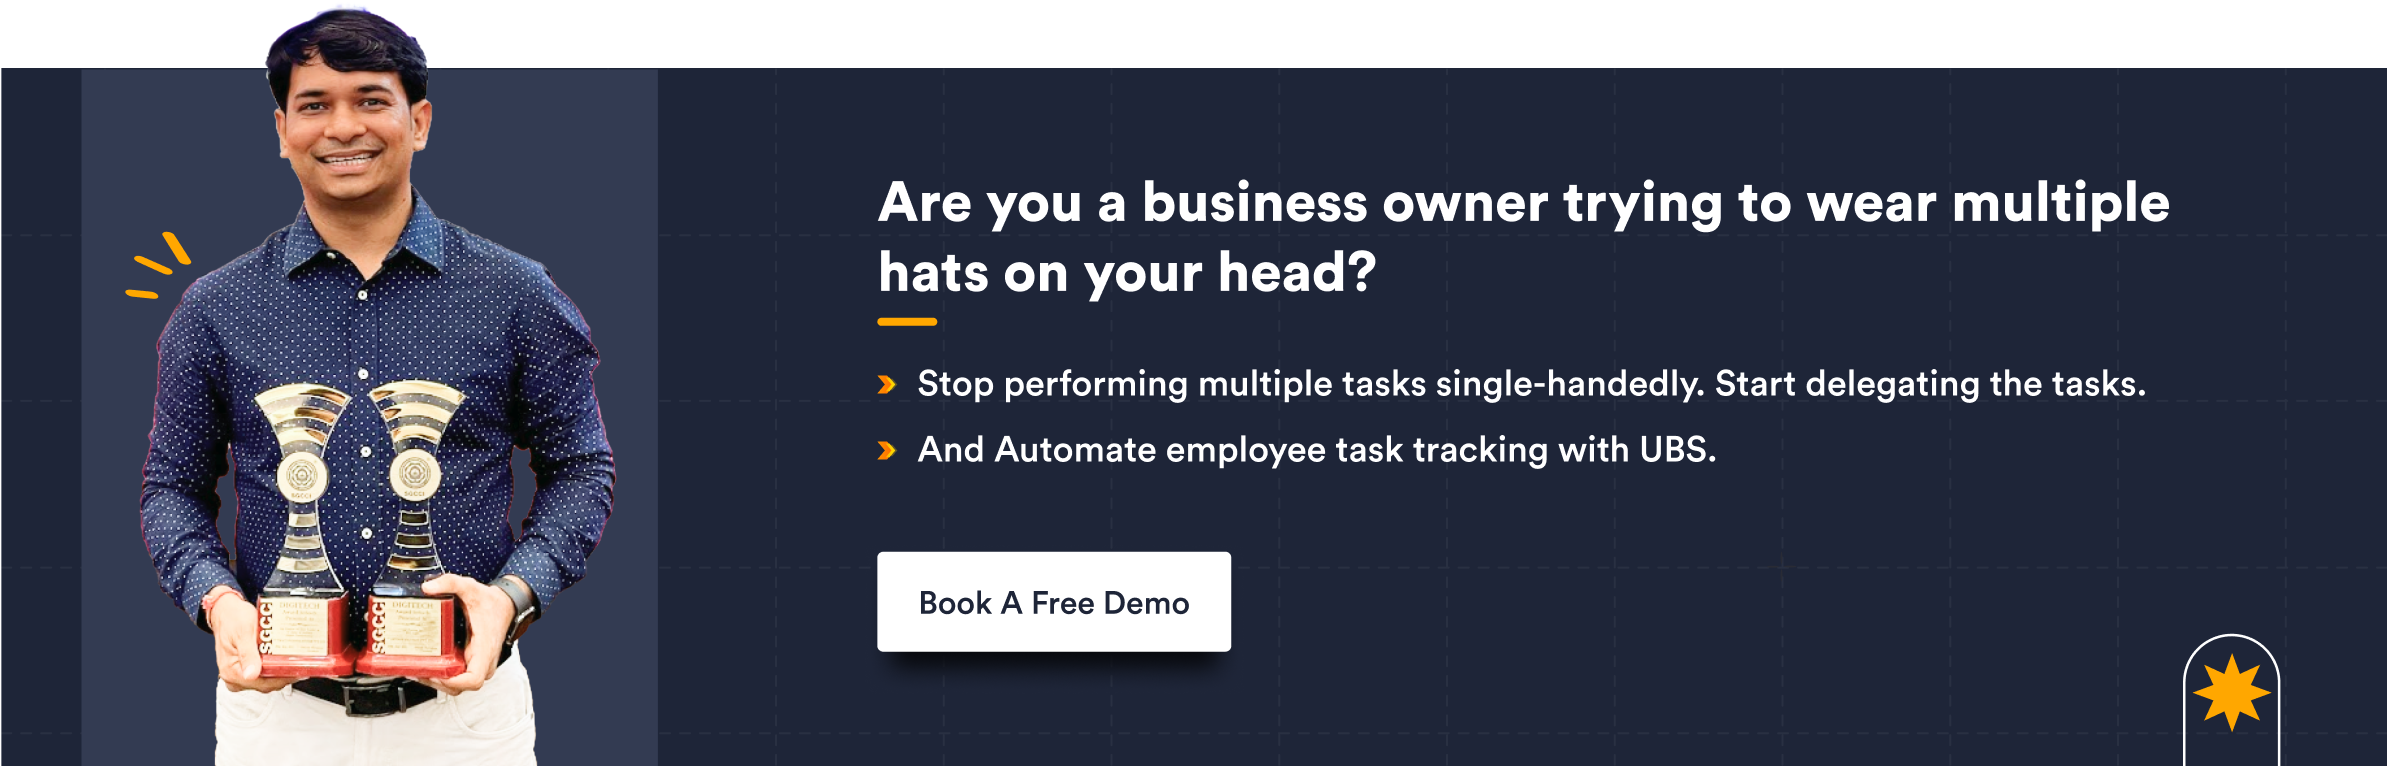 Are you a business owner trying to wear multiple hats on your head